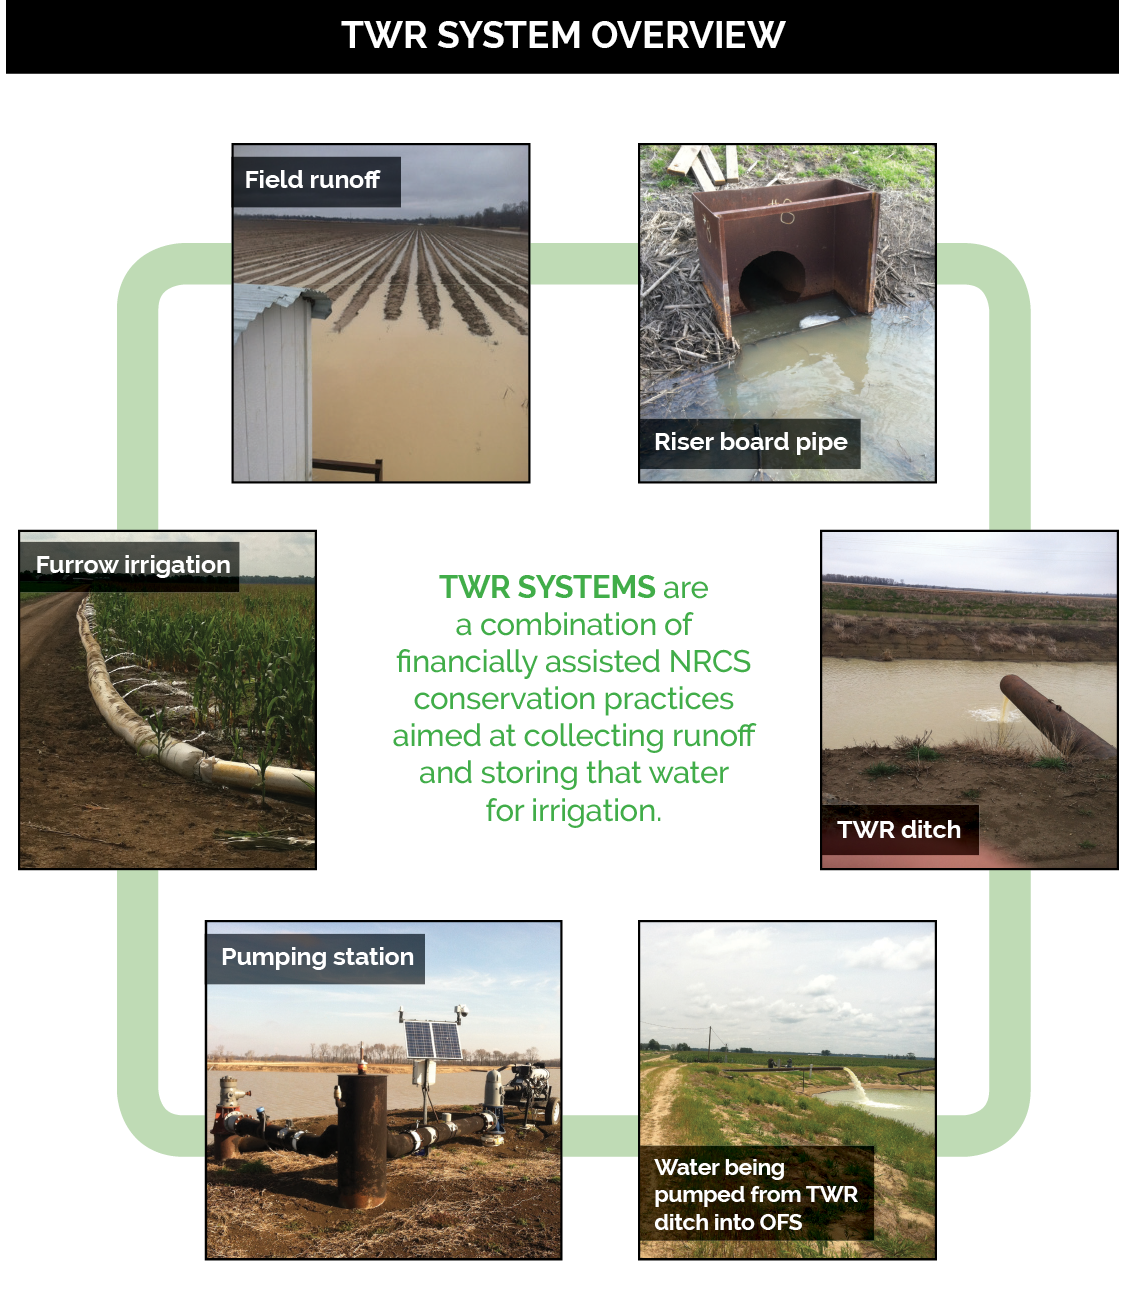 In a TWR system, water moves from a riser board pipe, to a TWR ditch, to being pumped from a TWR ditch into OFS, to a pumping station, to furrow irrigation, to field runoff, and the cycle repeats.